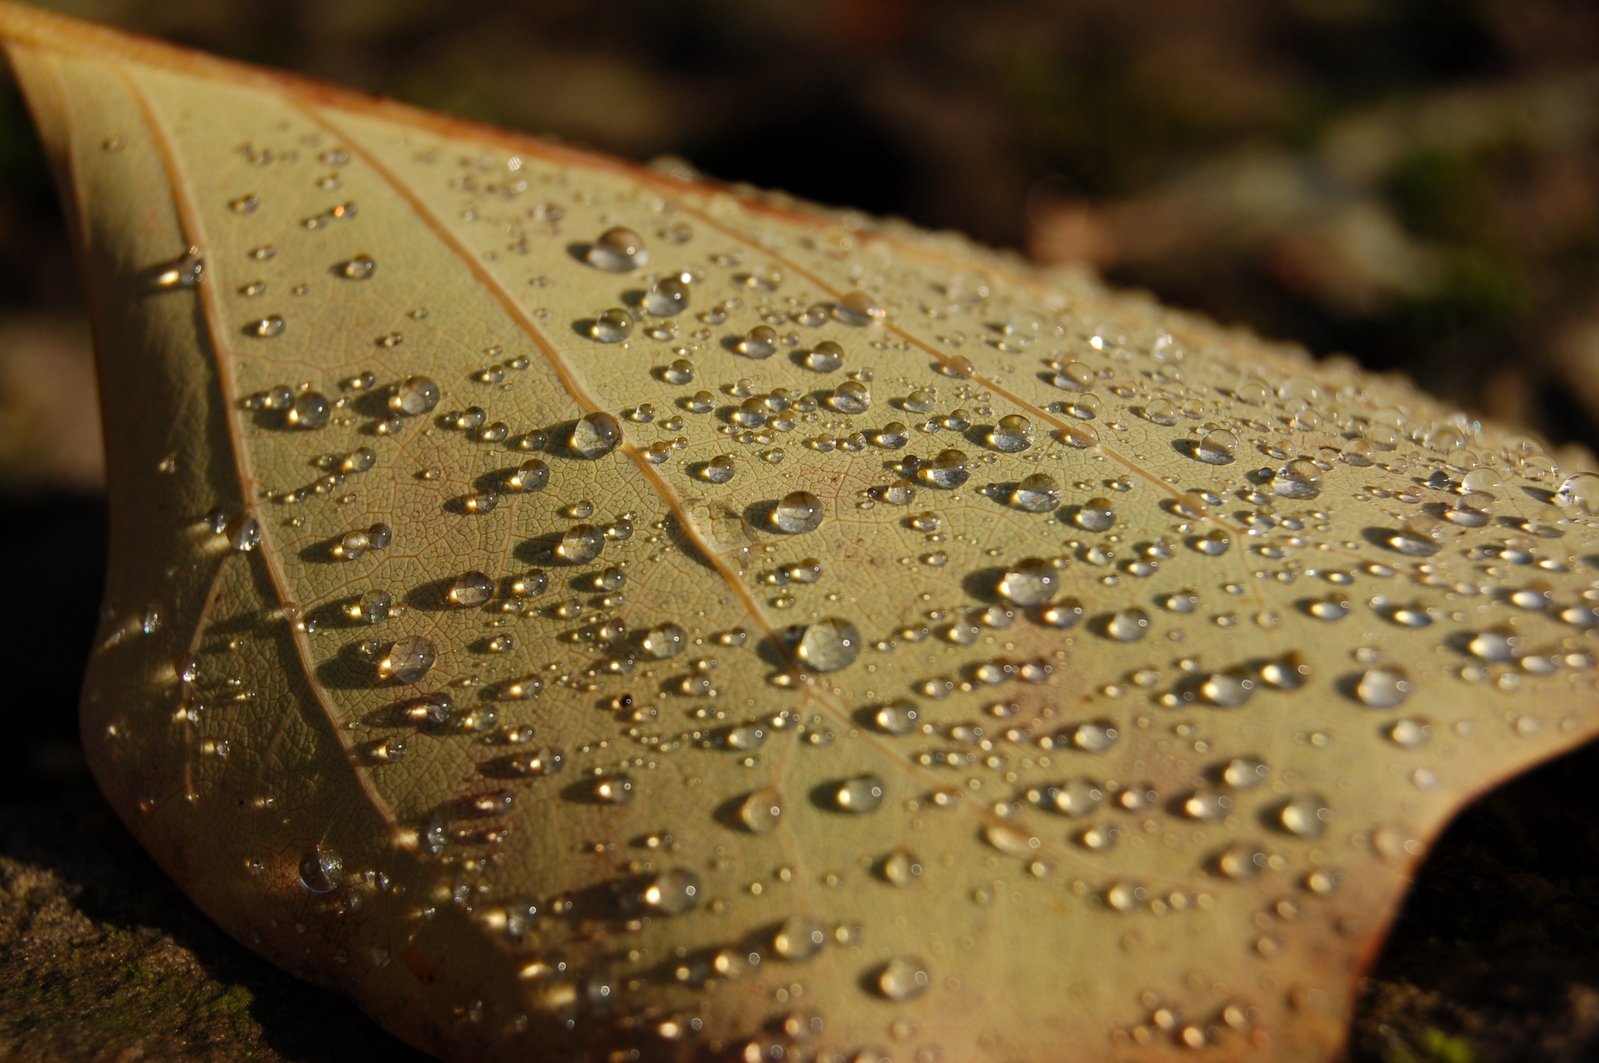 the underside of a leaf with water droplets on it